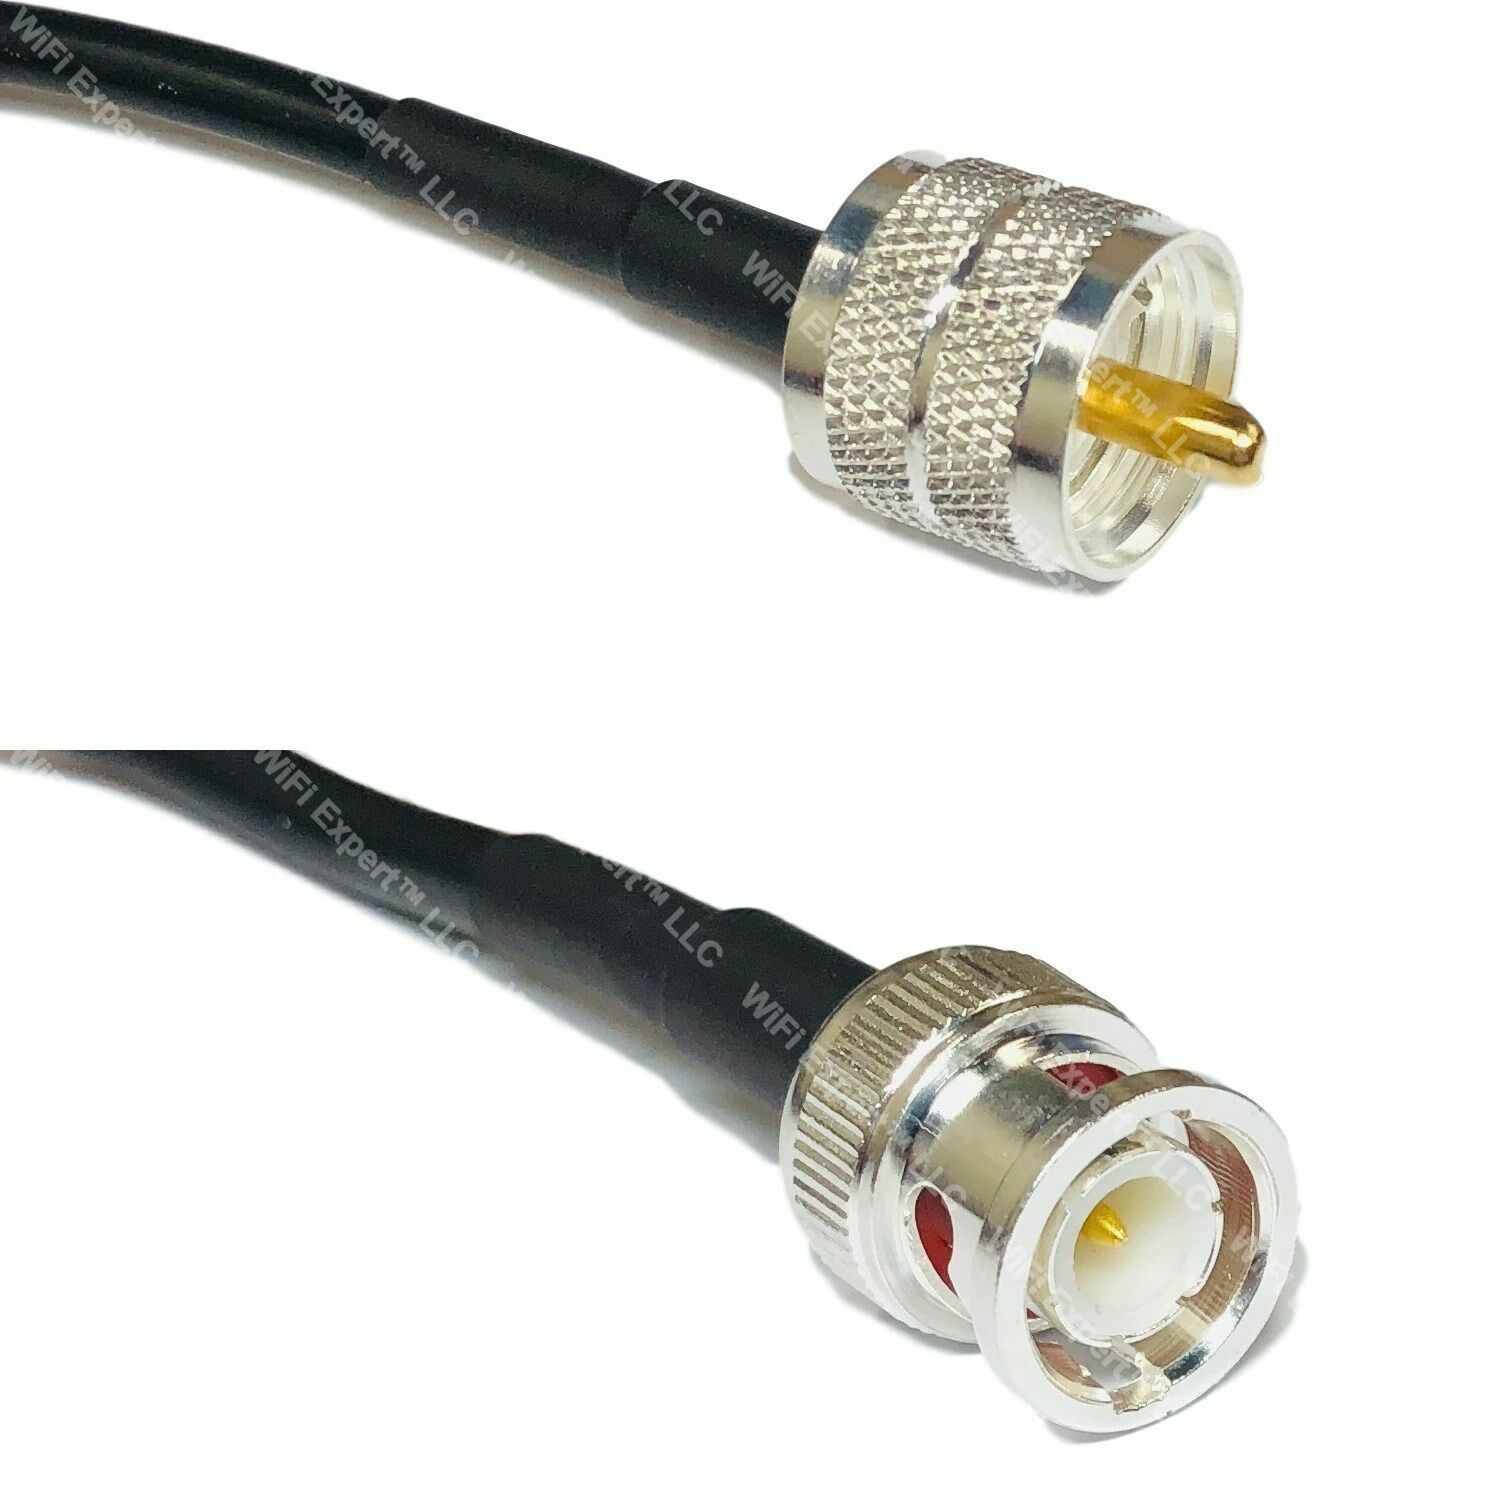 USA-CA LMR240 PL259 UHF MALE to BNC MALE Coaxial RF Pigtail Cable